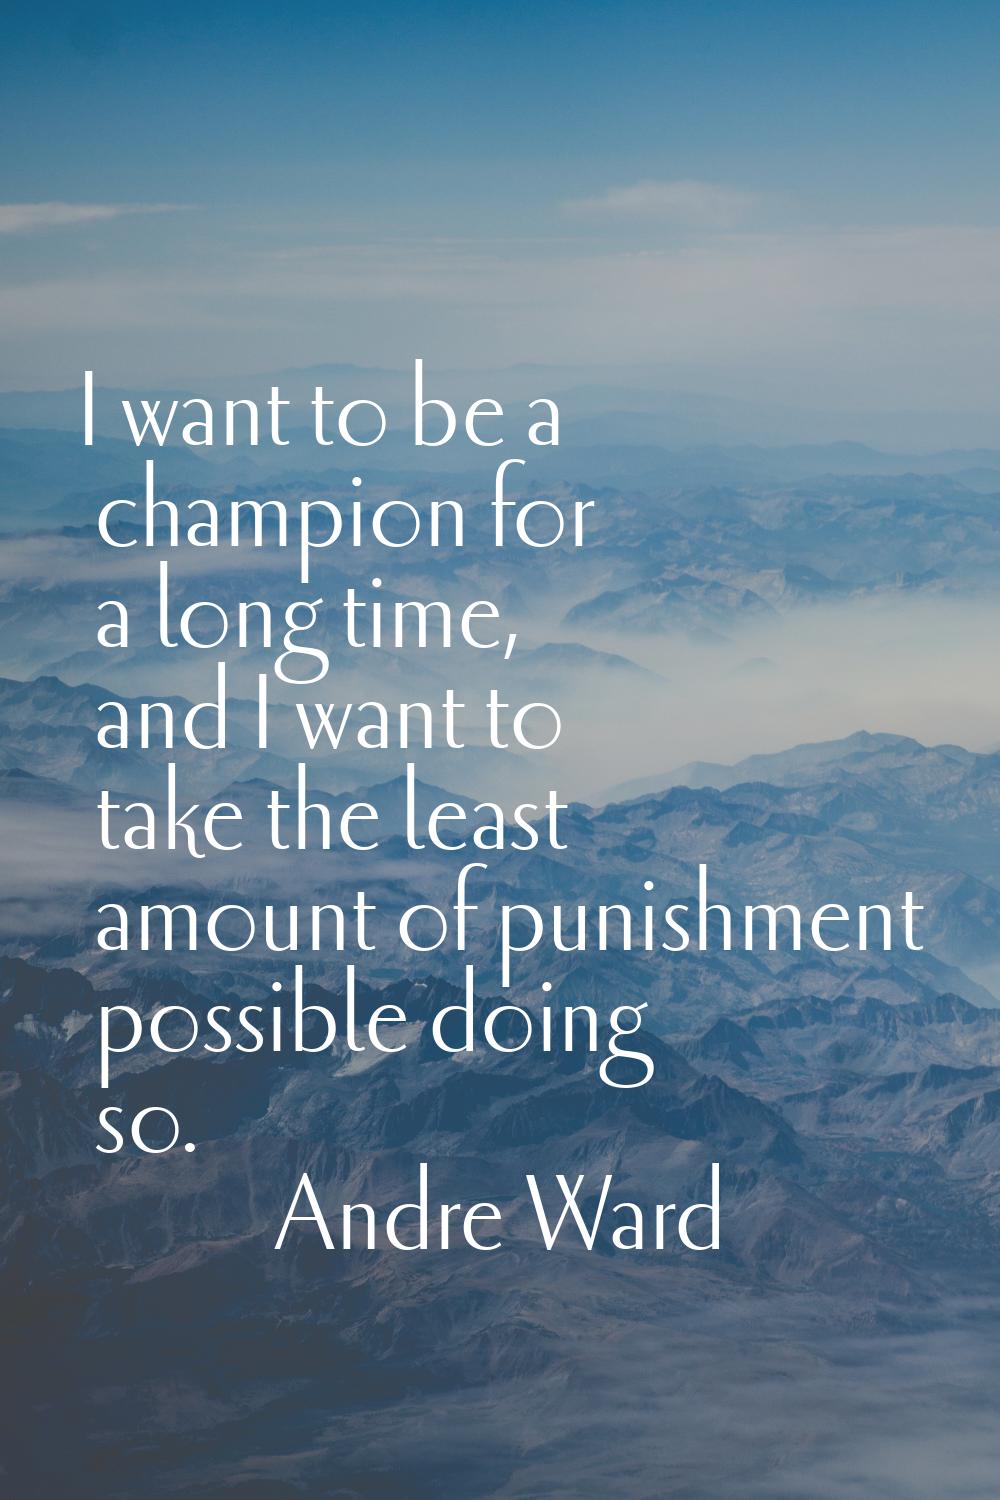 I want to be a champion for a long time, and I want to take the least amount of punishment possible